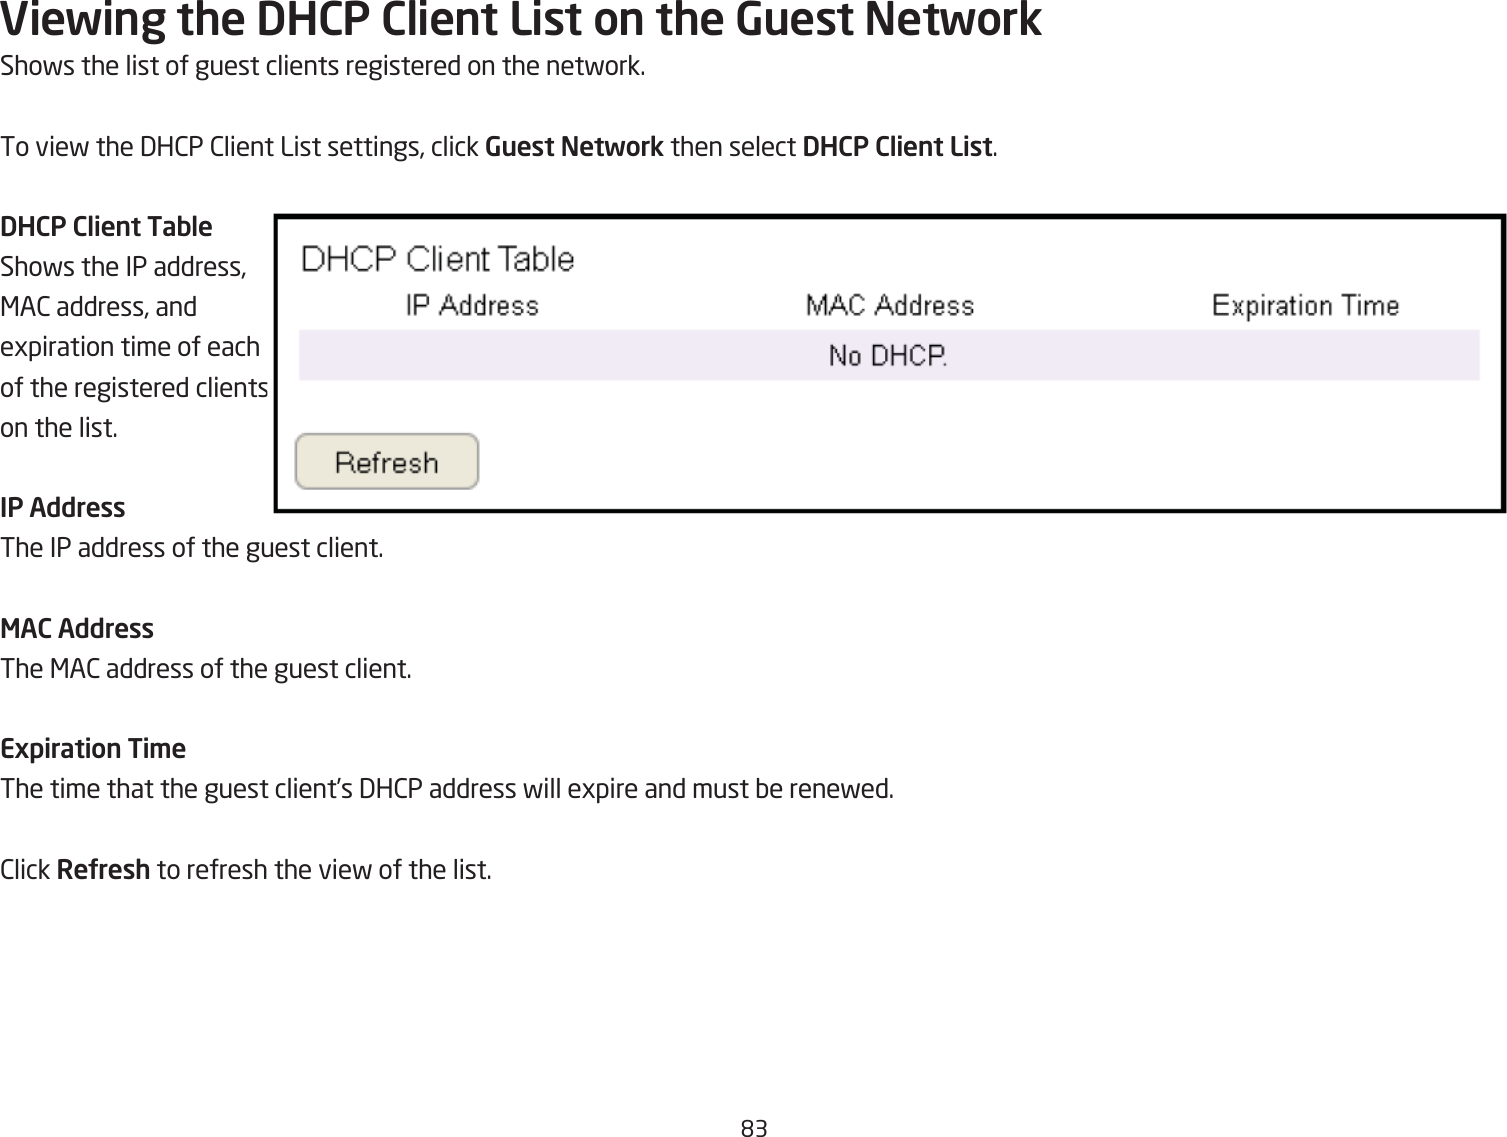 &apos;3Viewing the DHCP Client List on the Guest NetworkShofs the list of guest clients registered on the netfork.To vief the 3H2P 2lient List settings, click Guest Network then select DHCP Client List.DHCP Client TableShofs the IP address, &lt;A2 address, and egpiration time of each of the registered clients on the list.IP AddressThe IP address of the guest client.MAC AddressThe &lt;A2 address of the guest client.Expiration Ti\eThe time that the guest client’s 3H2P address fill egpire and must Qe renefed.2lick ReUresh to refresh the vief of the list.